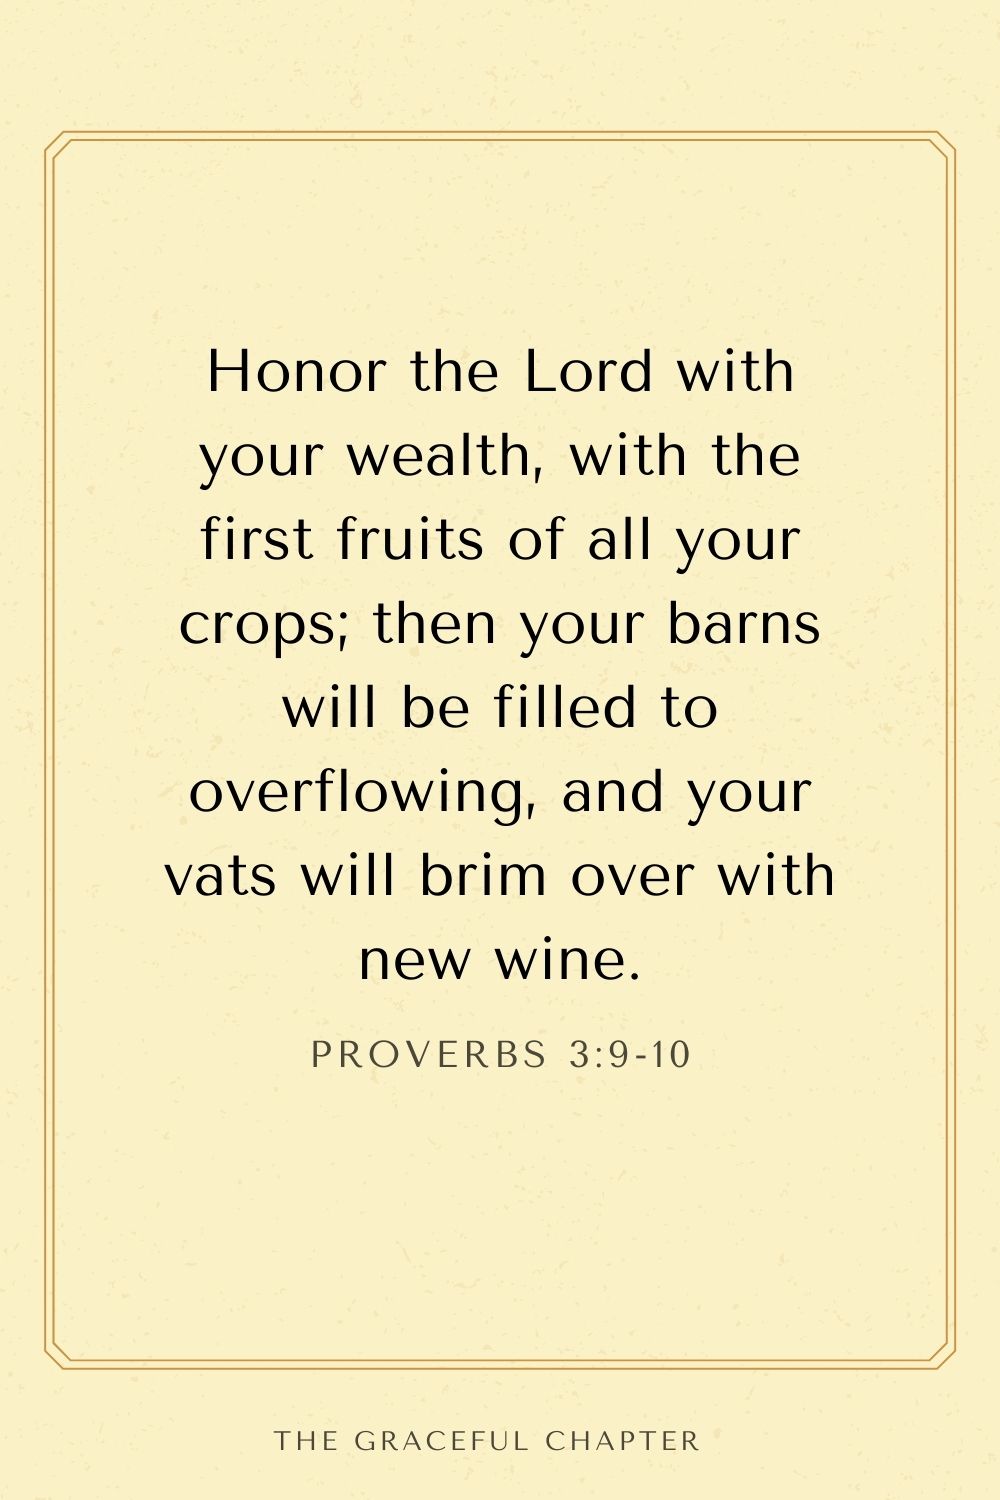 Honor the Lord with your wealth, with the first fruits of all your crops; then your barns will be filled to overflowing, and your vats will brim over with new wine. Proverbs 3:9-10